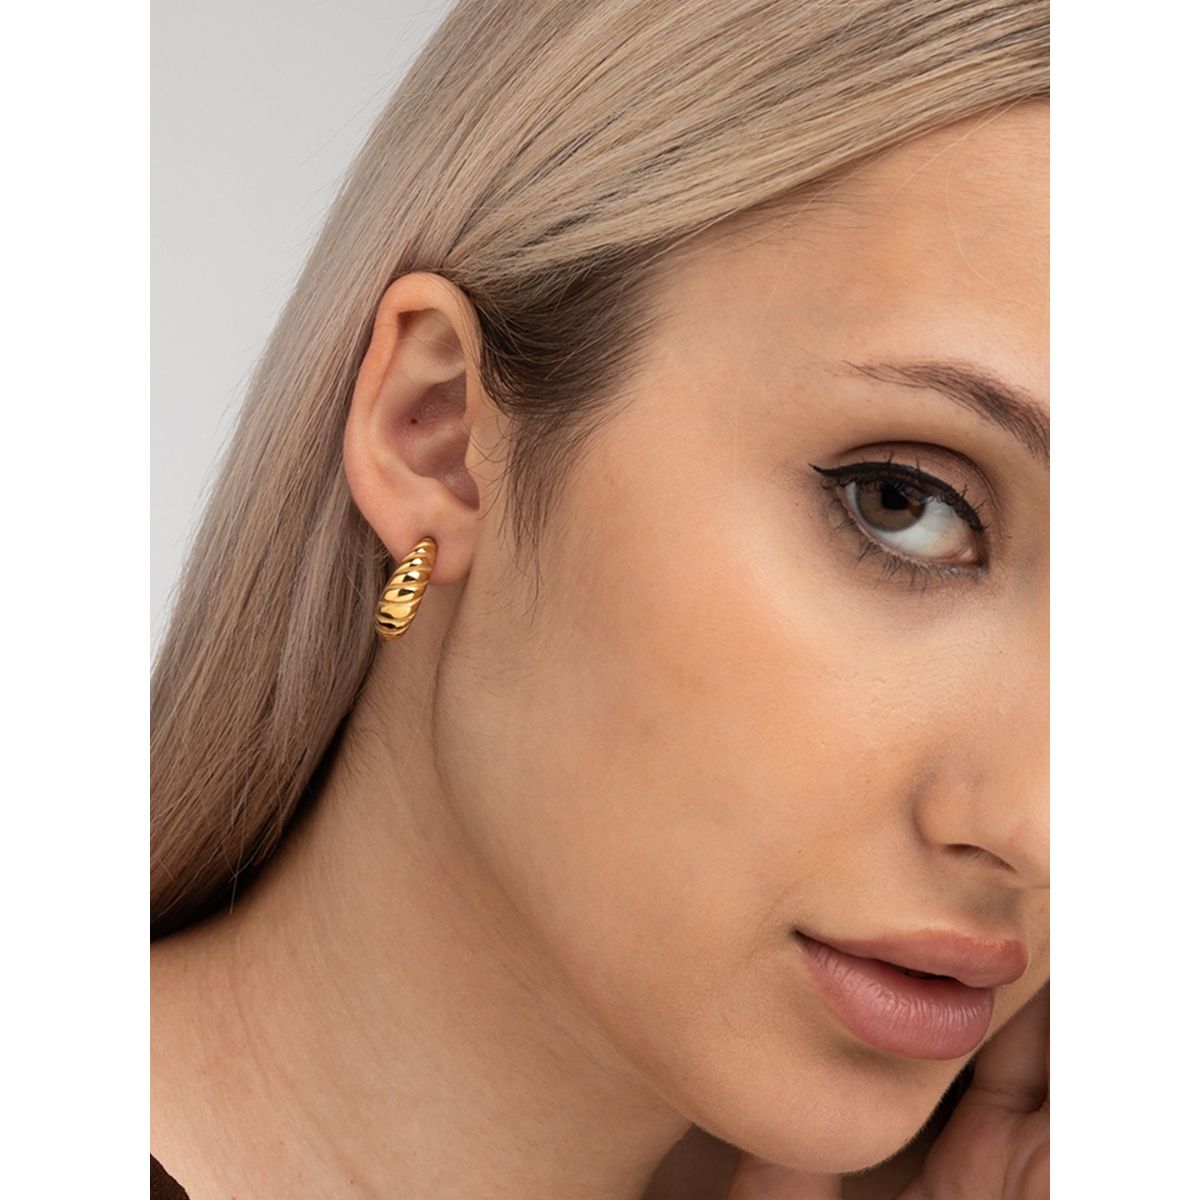 The Esther Earrings in 18K gold plating | LIÉ STUDIO